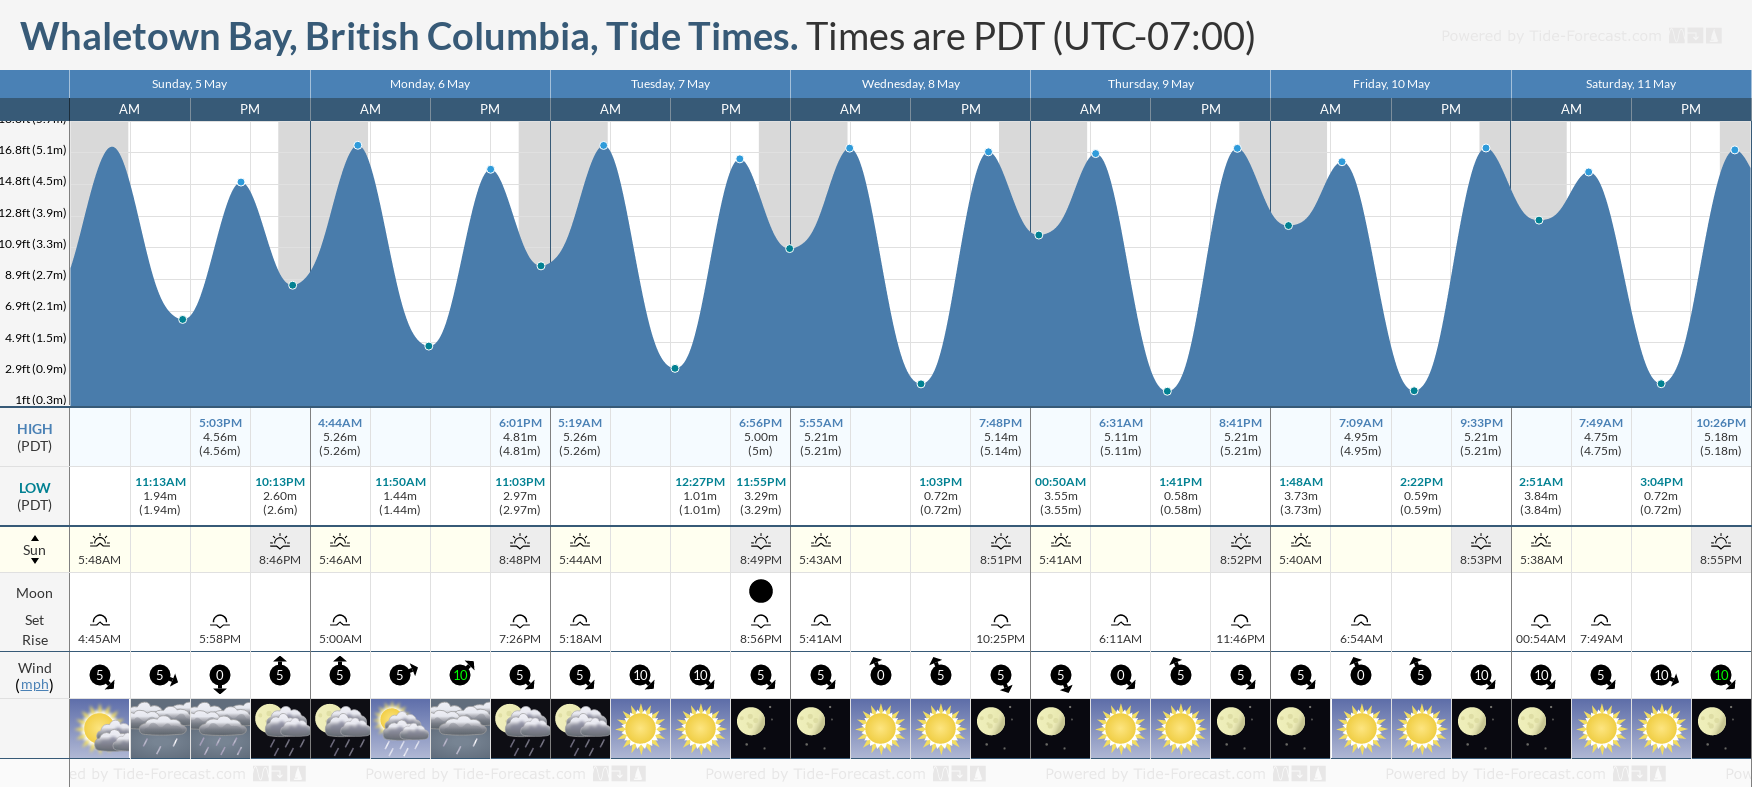 Whaletown Bay, British Columbia Tide Chart including high and low tide tide times for the next 7 days